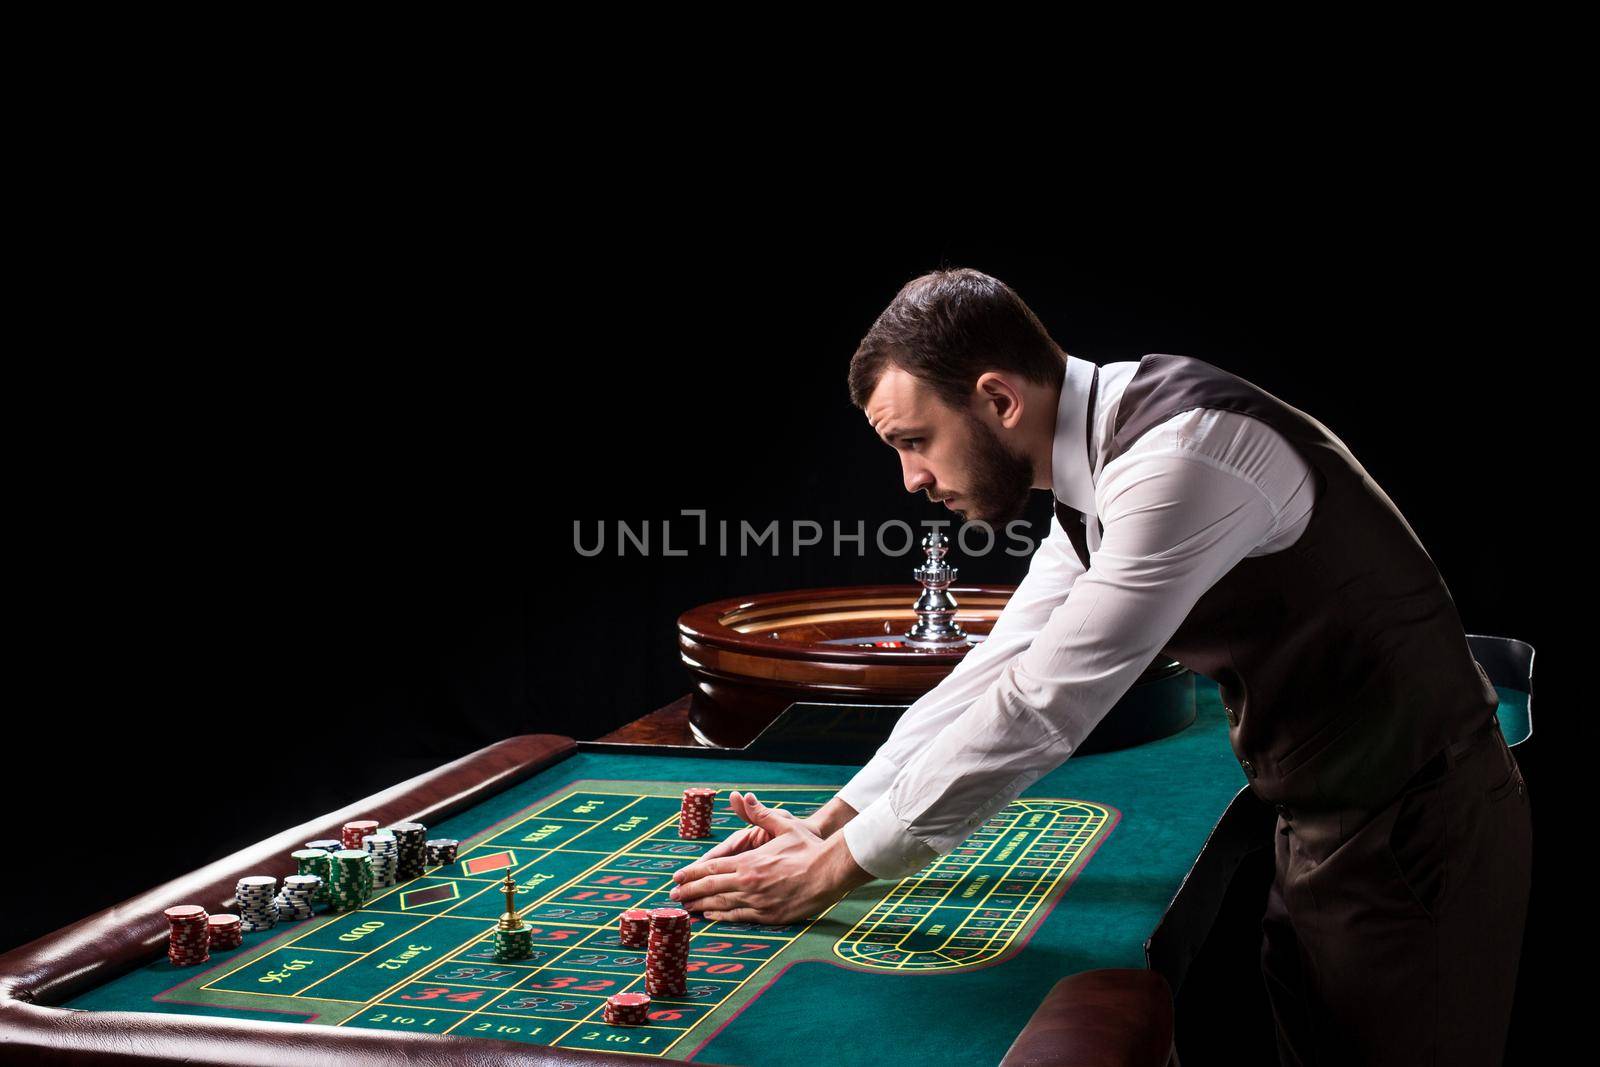 Croupier behind gambling table in a casino. by nazarovsergey